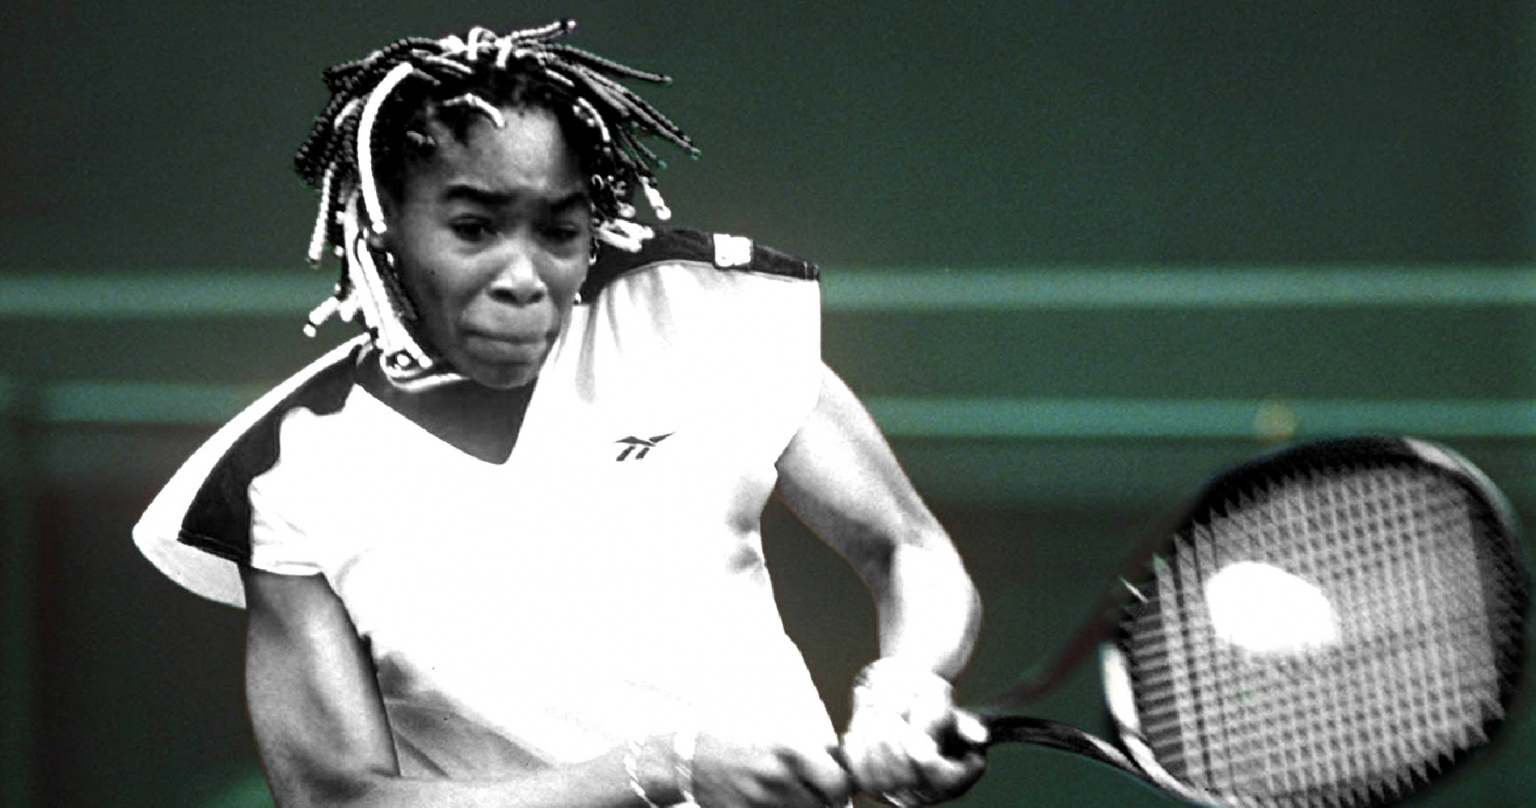 October 31, 1994: The day Venus Williams made her professional debut at